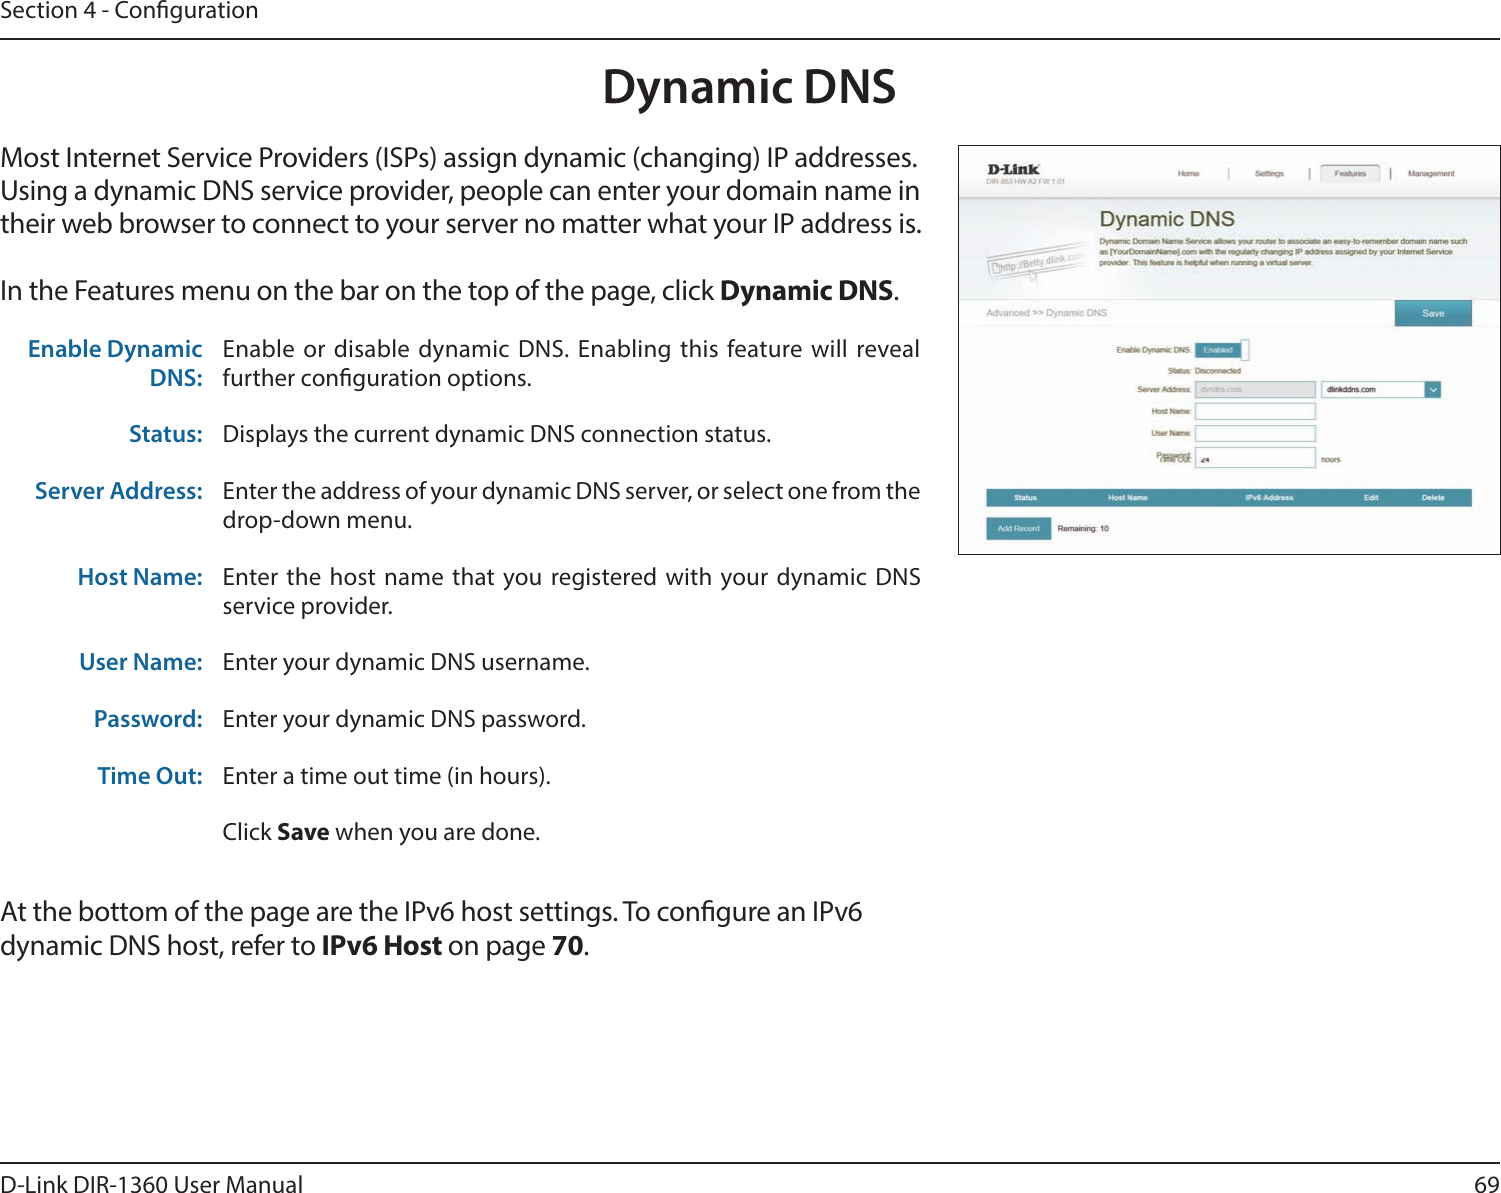 69D-Link DIR-1360 User ManualSection 4 - CongurationDynamic DNSMost Internet Service Providers (ISPs) assign dynamic (changing) IP addresses. Using a dynamic DNS service provider, people can enter your domain name in their web browser to connect to your server no matter what your IP address is.In the Features menu on the bar on the top of the page, click Dynamic DNS.At the bottom of the page are the IPv6 host settings. To congure an IPv6 dynamic DNS host, refer to IPv6 Host on page 70.Enable Dynamic DNS:Enable or disable dynamic DNS. Enabling this feature will reveal further conguration options.Status: Displays the current dynamic DNS connection status.Server Address: Enter the address of your dynamic DNS server, or select one from the drop-down menu.Host Name: Enter the host name that you registered with your dynamic DNS service provider.User Name: Enter your dynamic DNS username.Password: Enter your dynamic DNS password.Time Out: Enter a time out time (in hours).Click Save when you are done.